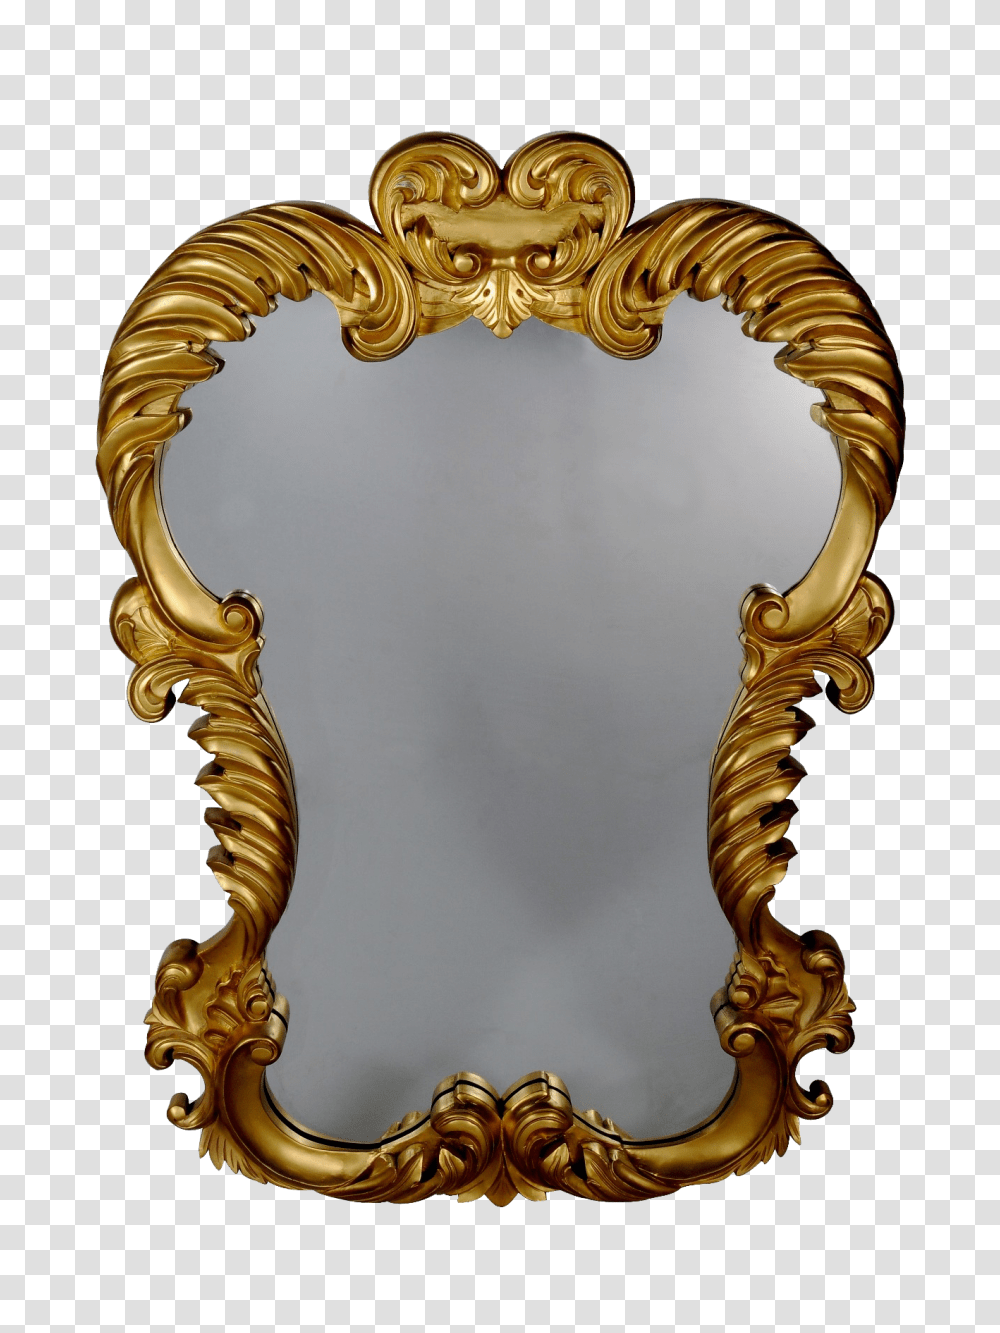 Golden Mirror Frame Image, Bracelet, Jewelry, Accessories, Accessory Transparent Png